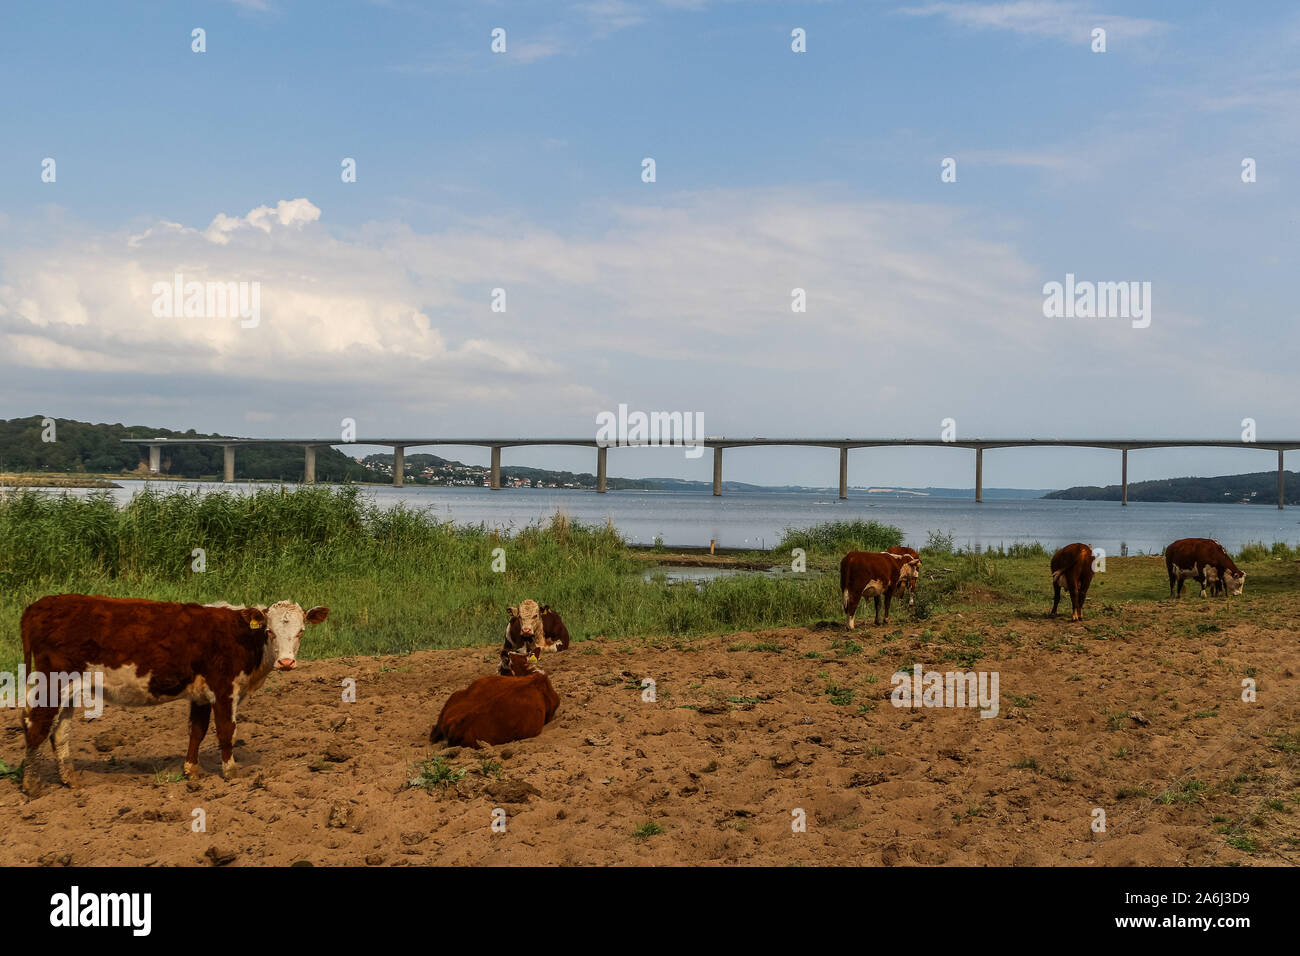 Danish Red cattle cows in front of Vejle Fjord Bridge ( Vejlefjordbroen) are seen in Vejle , Denmark on 30 July 2019 The bridge over the Vejle Fiord is 1712 m long, the longest span is 110 m, and the maximum clearance to the sea is 40 m.  © Michal Fludra / Alamy Live News Stock Photo